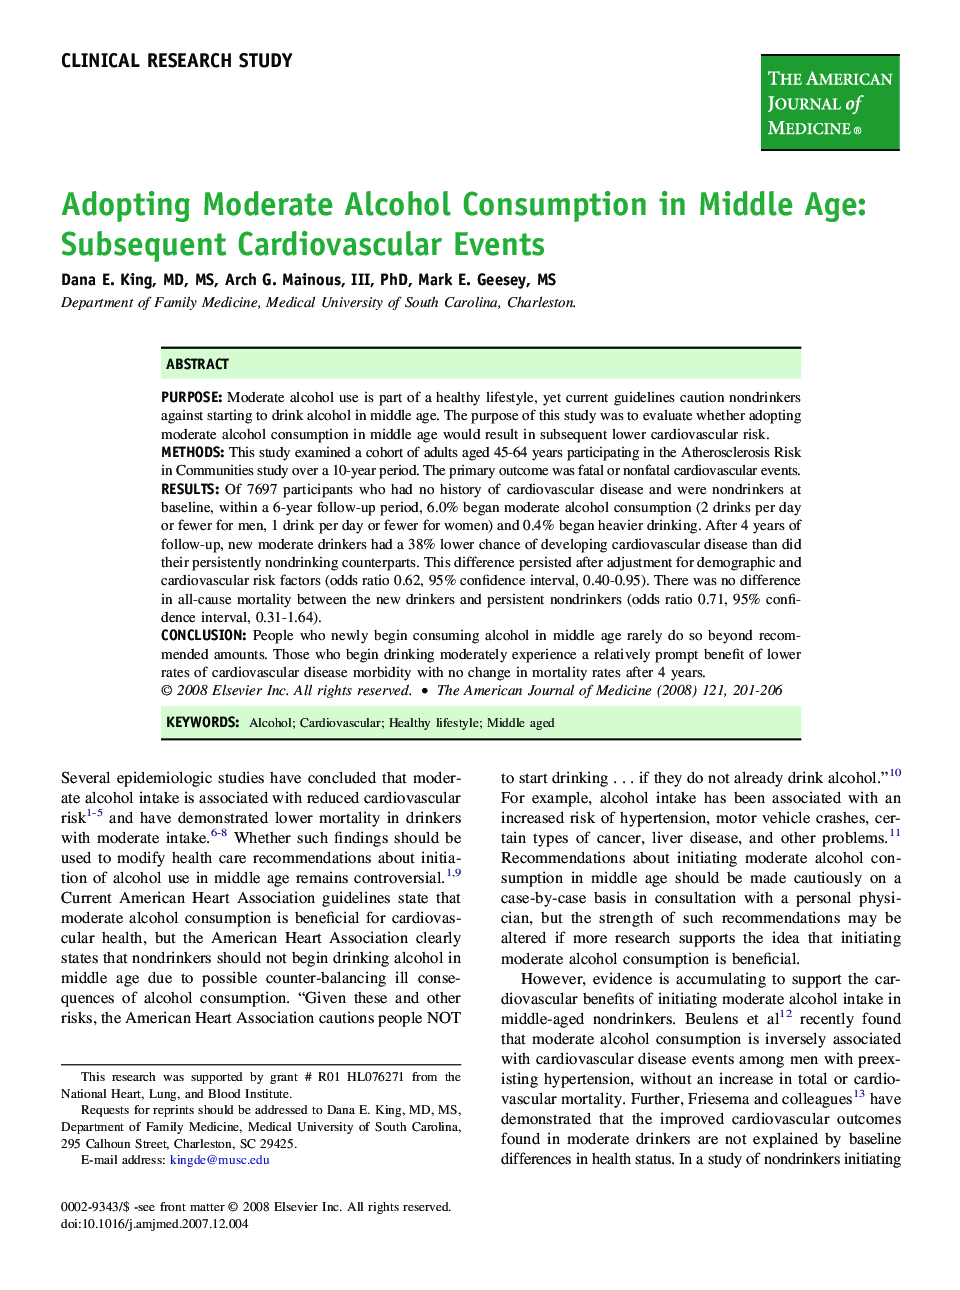 Adopting Moderate Alcohol Consumption in Middle Age: Subsequent Cardiovascular Events 